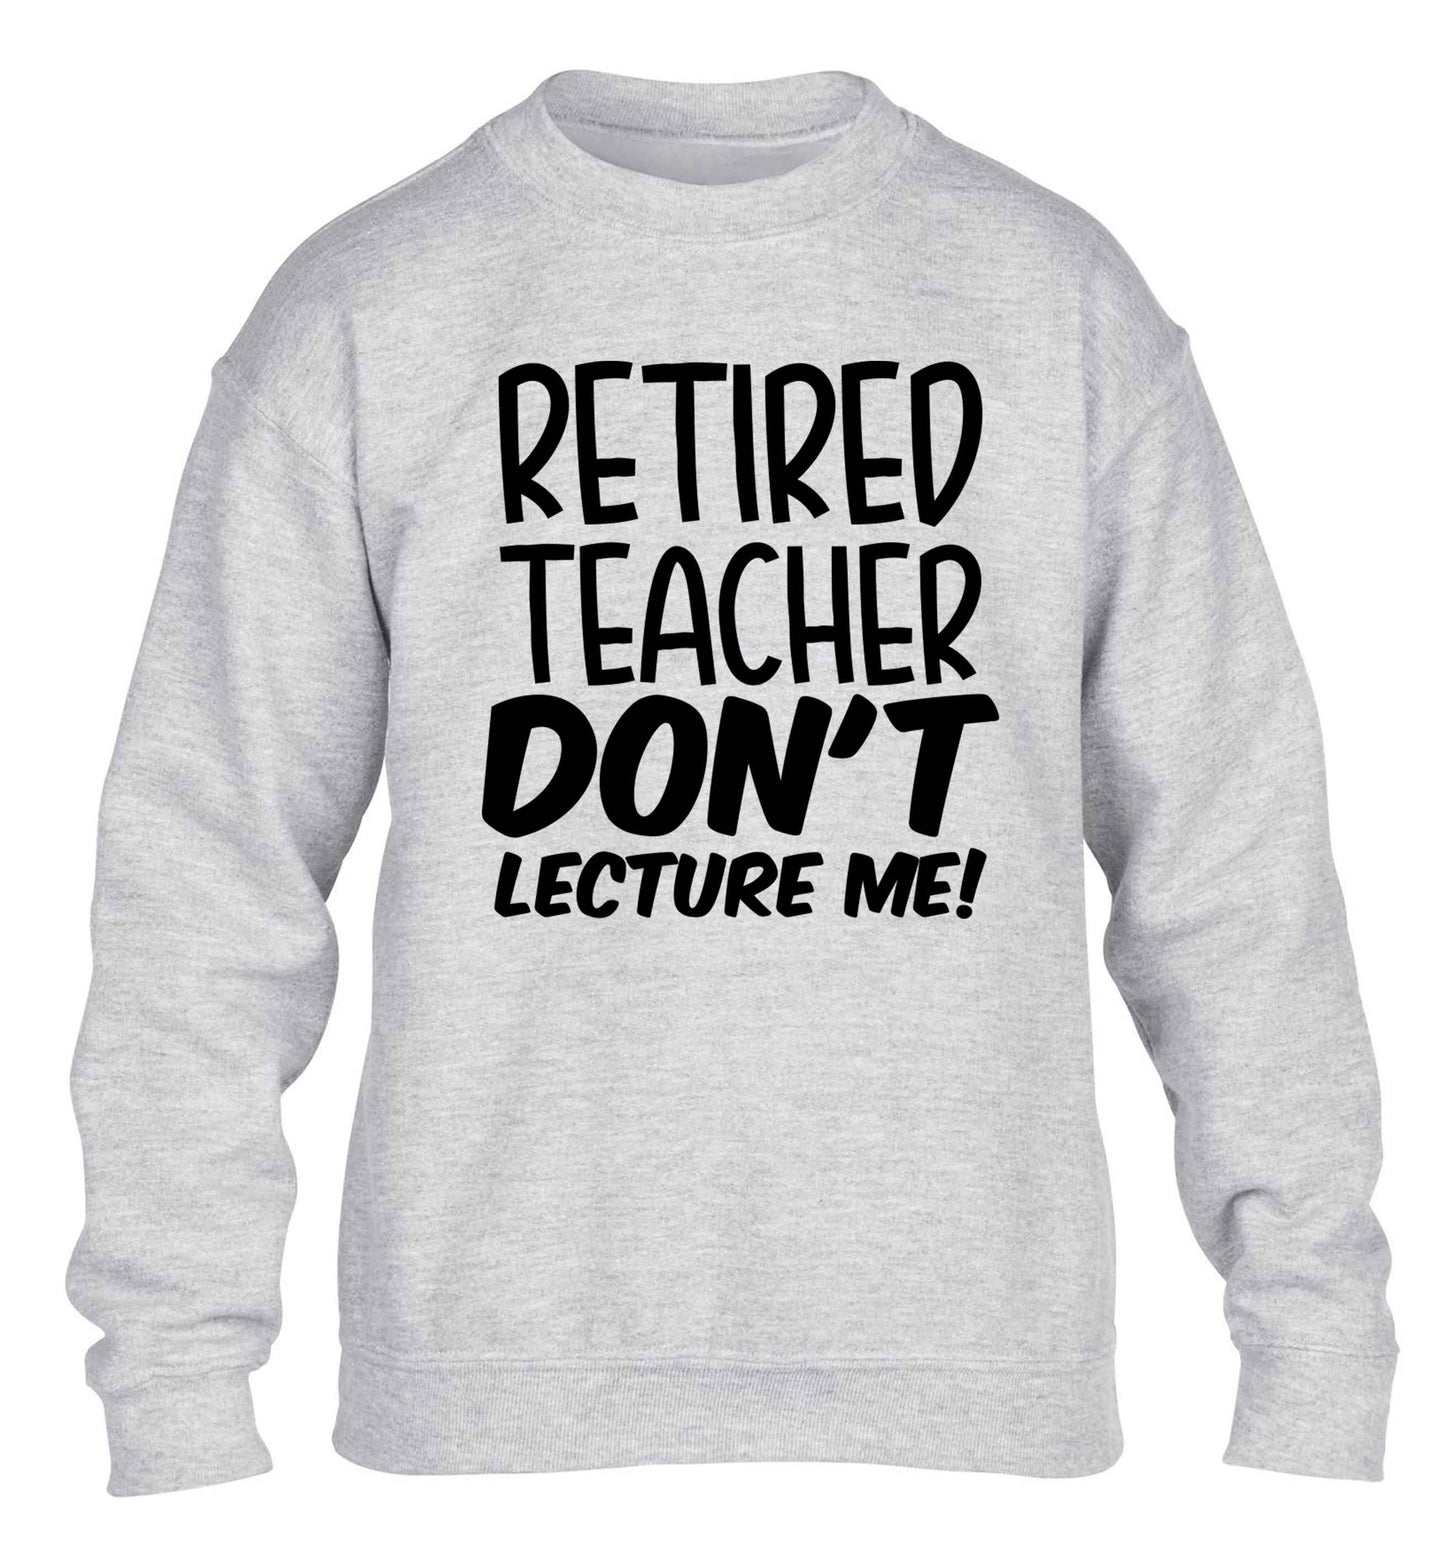 Retired teacher don't lecture me! children's grey sweater 12-13 Years